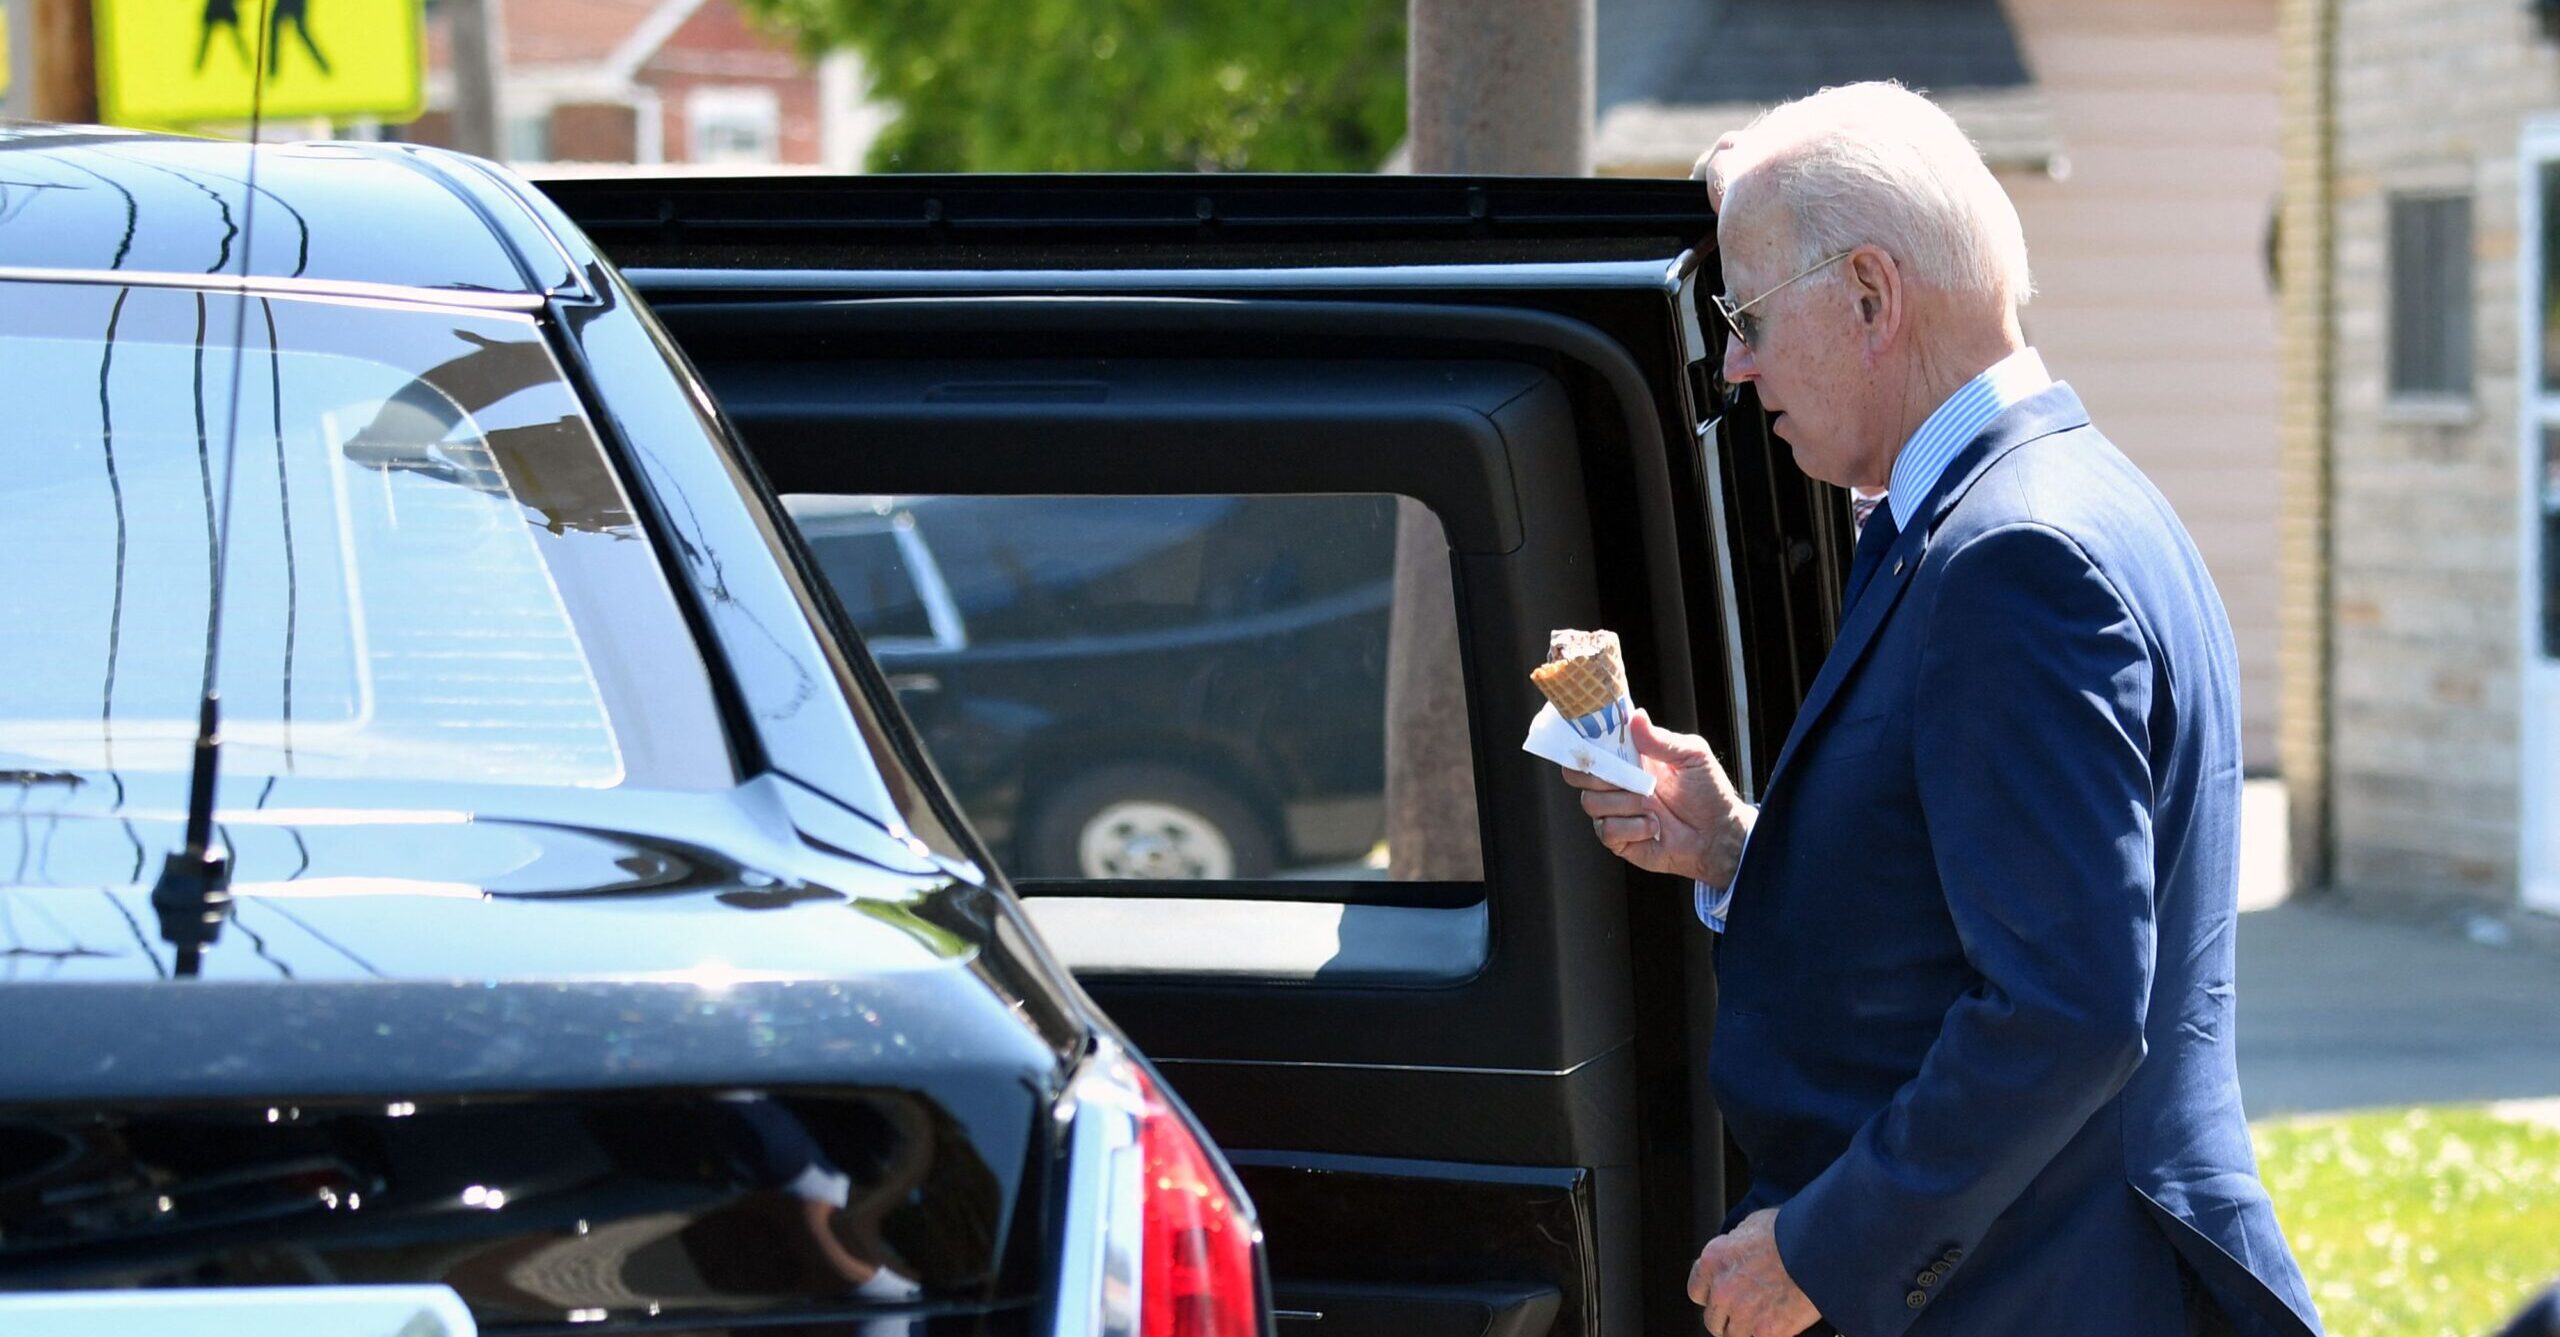 Biden’s Net Approval Rating Hits at All-Time Low, Is Worse Than Trump’s at Same Point in Presidency